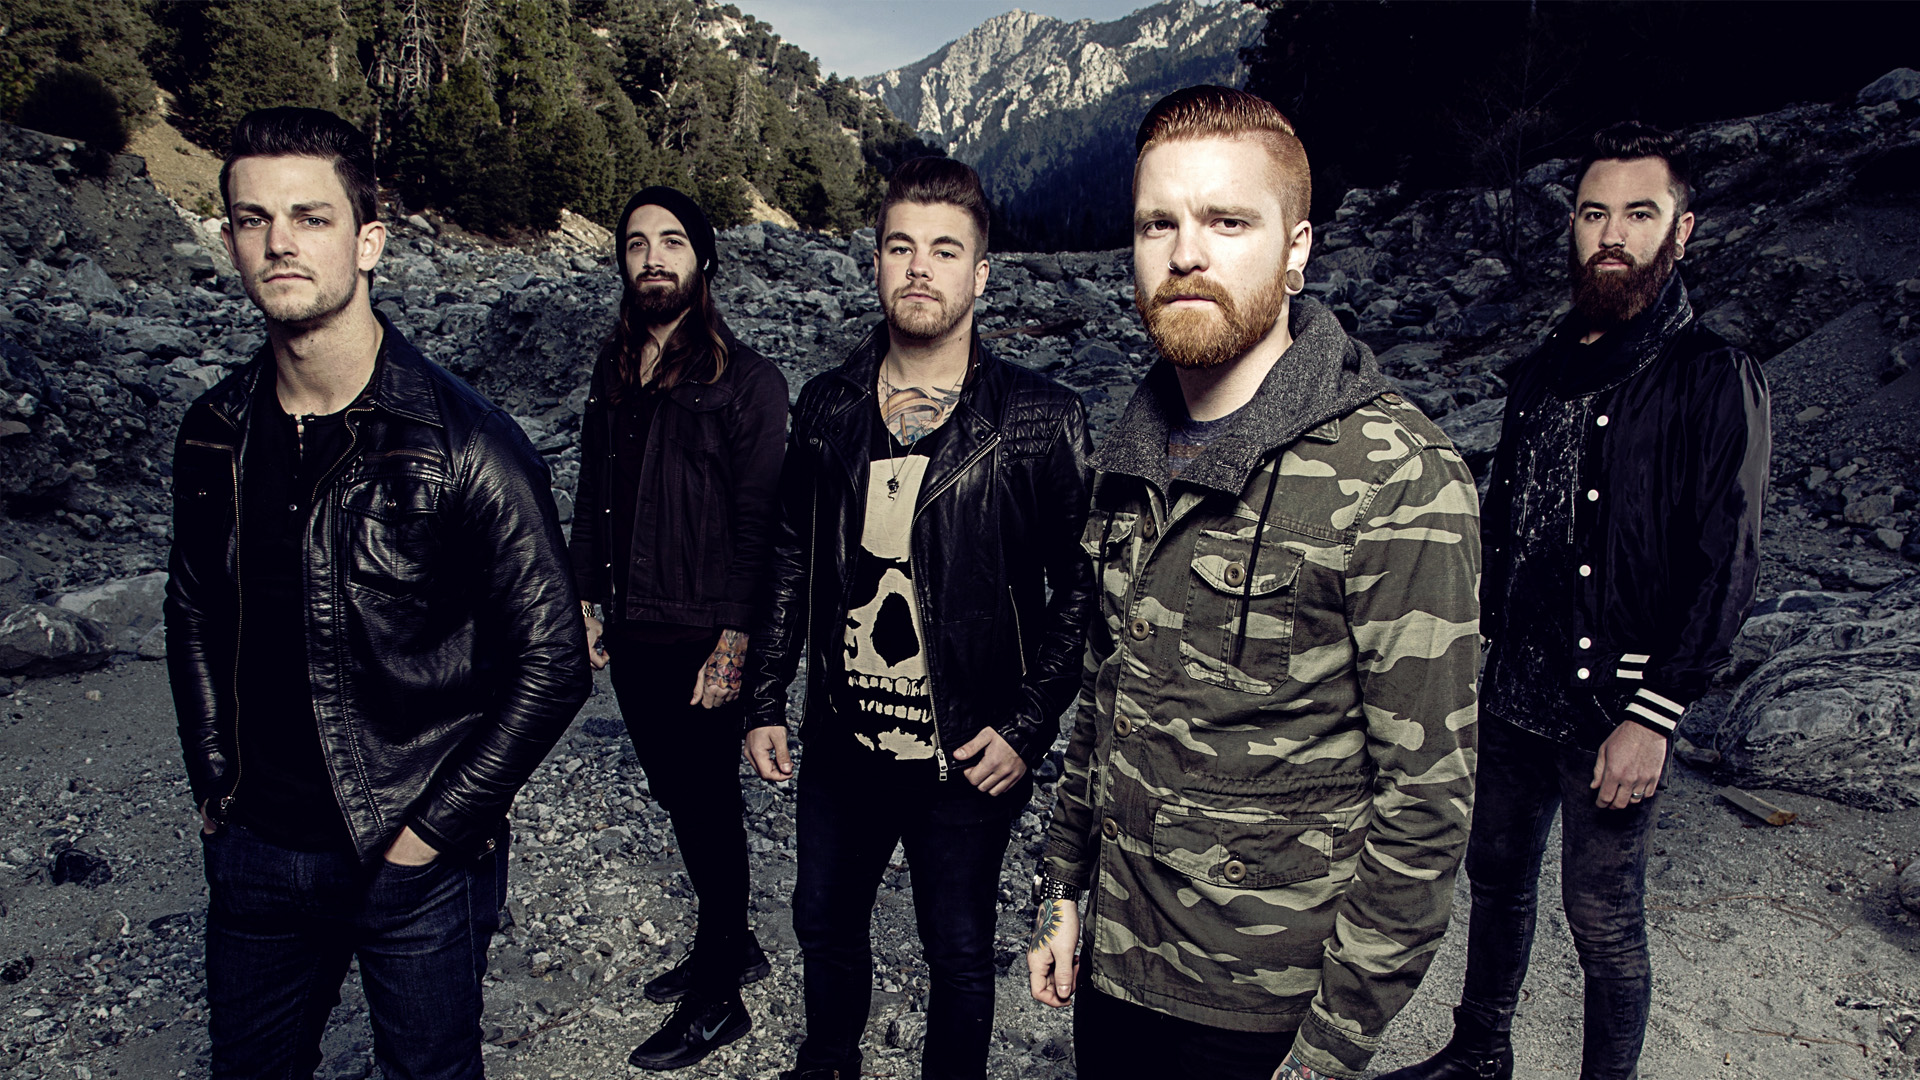 Memphis May Fire Iphone Wallpapers